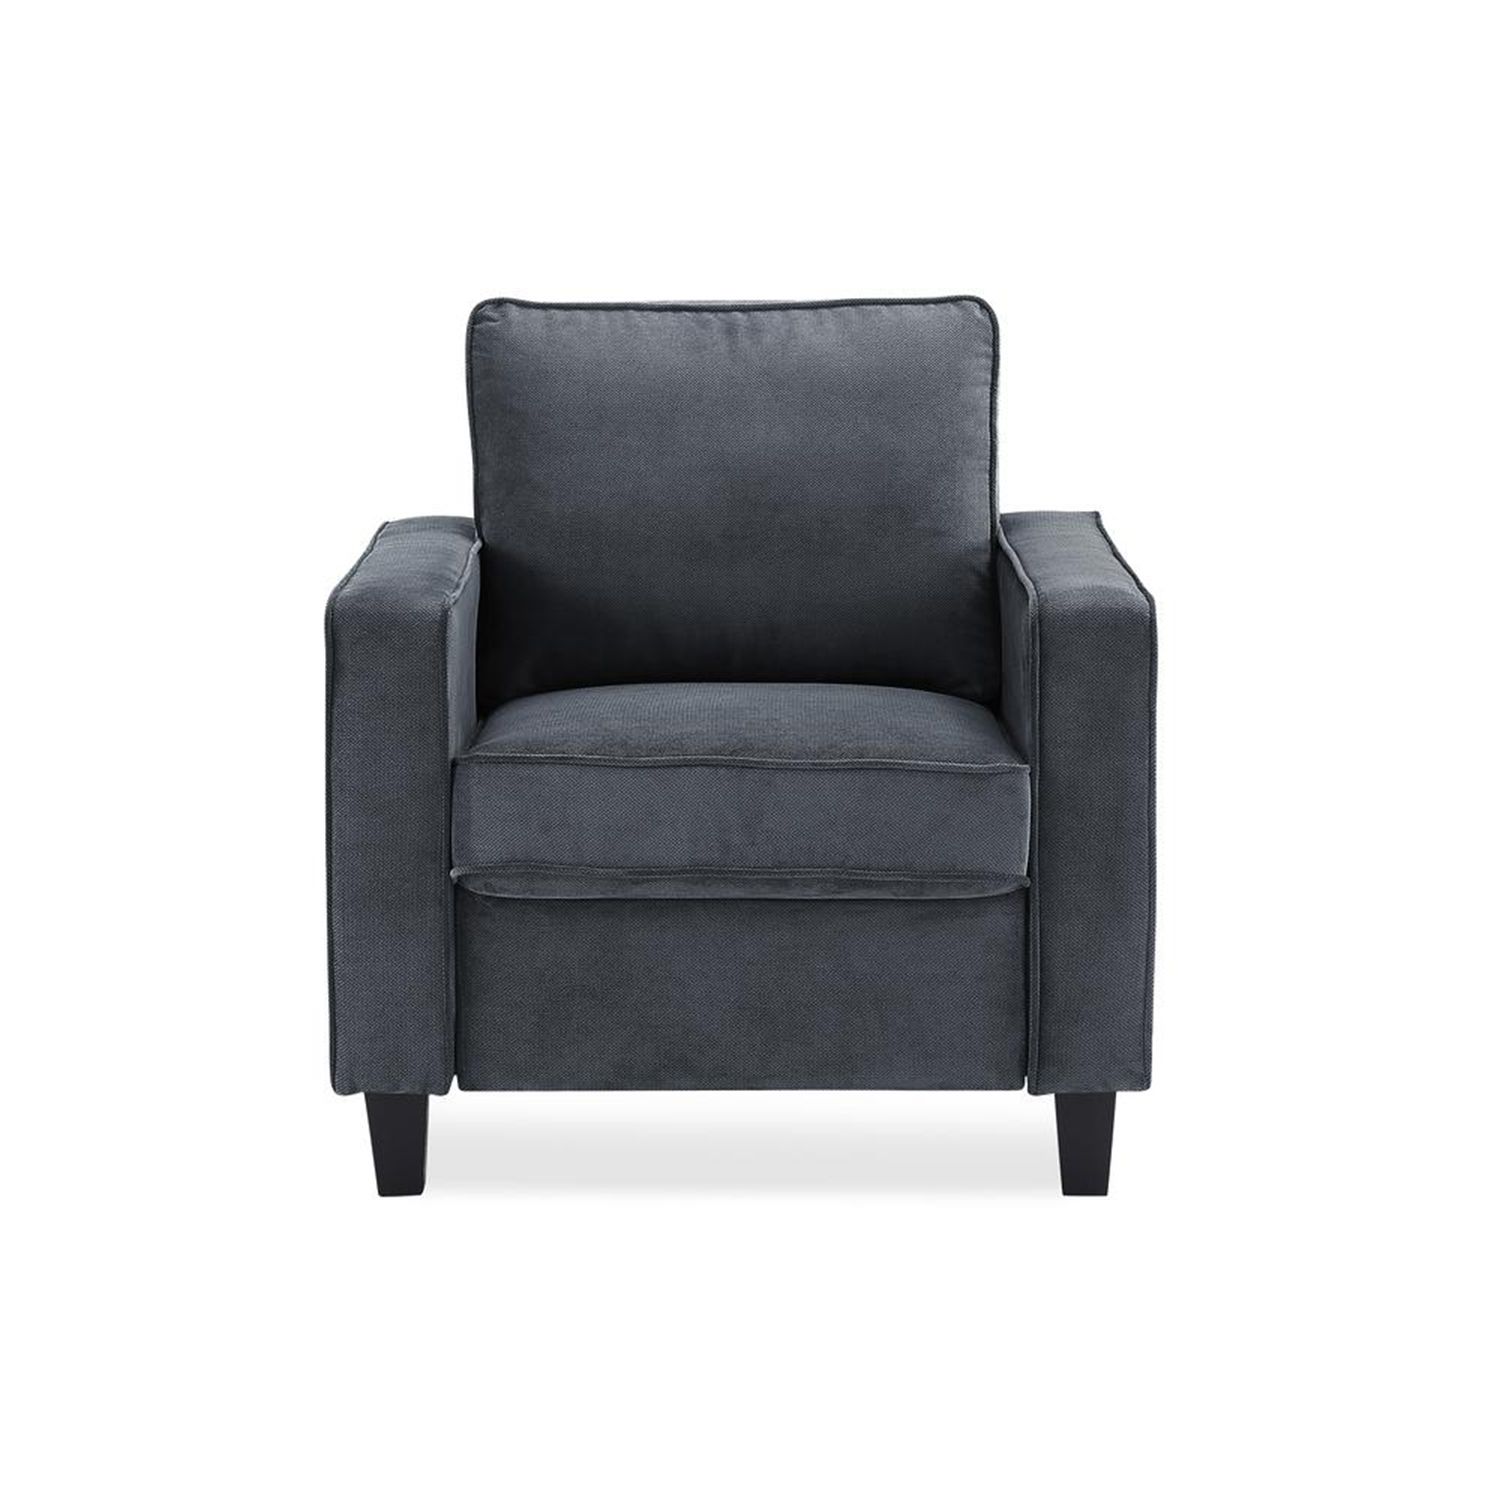 Lifestyle Solutions Garren Dark Grey Polyester Chair Lk Glm S1xm3011 Intended For Allie Dark Grey Sofa Chairs (View 14 of 25)